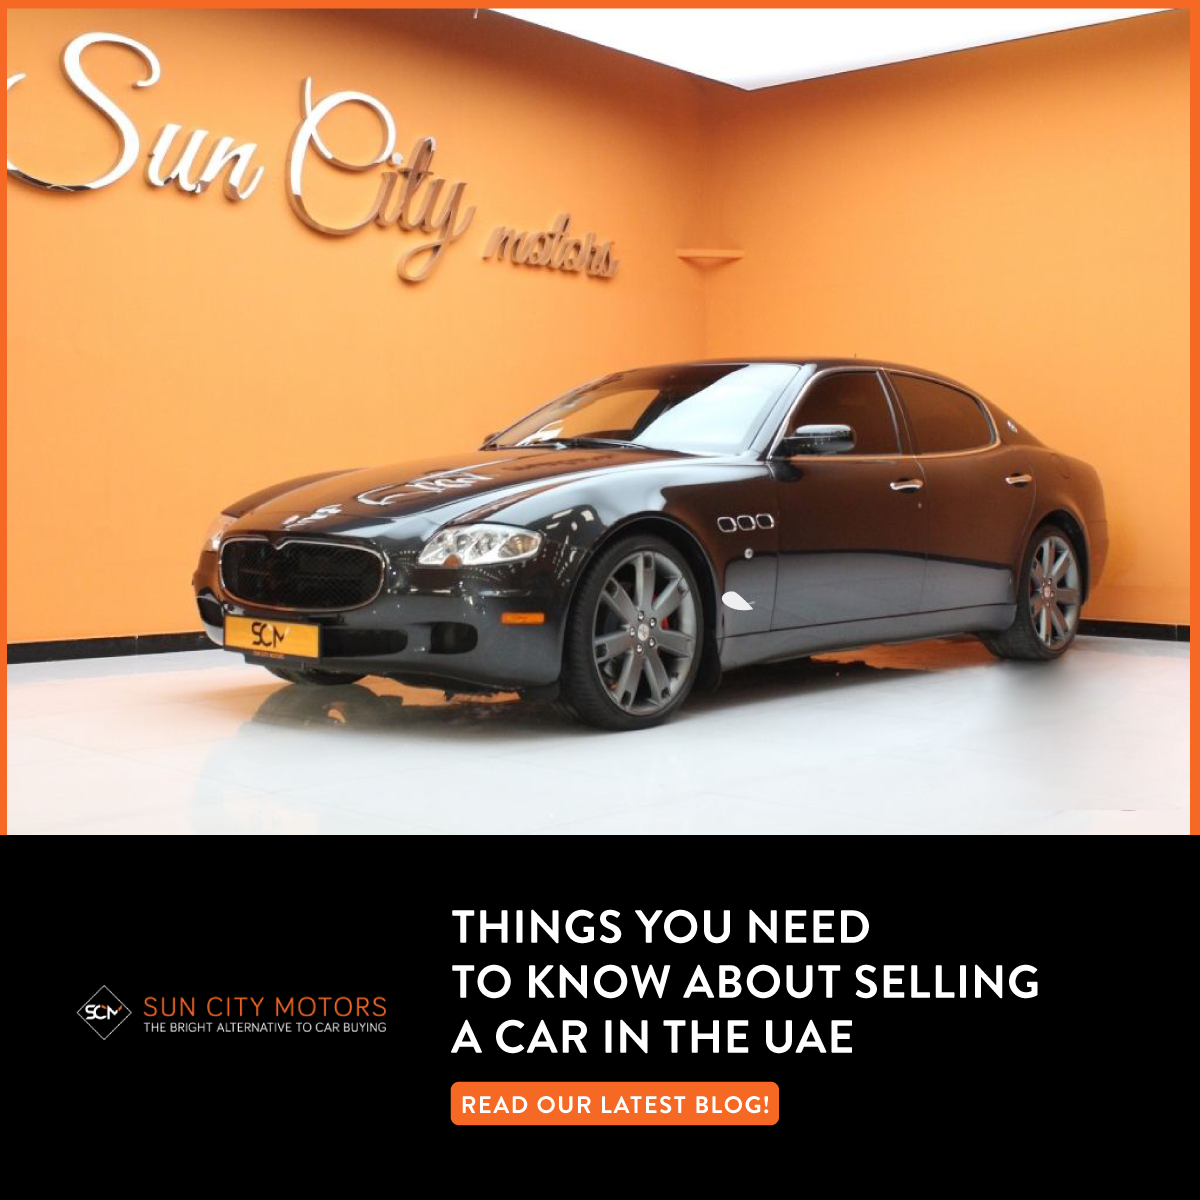 Things You Need to Know About Selling a Car in the UAE